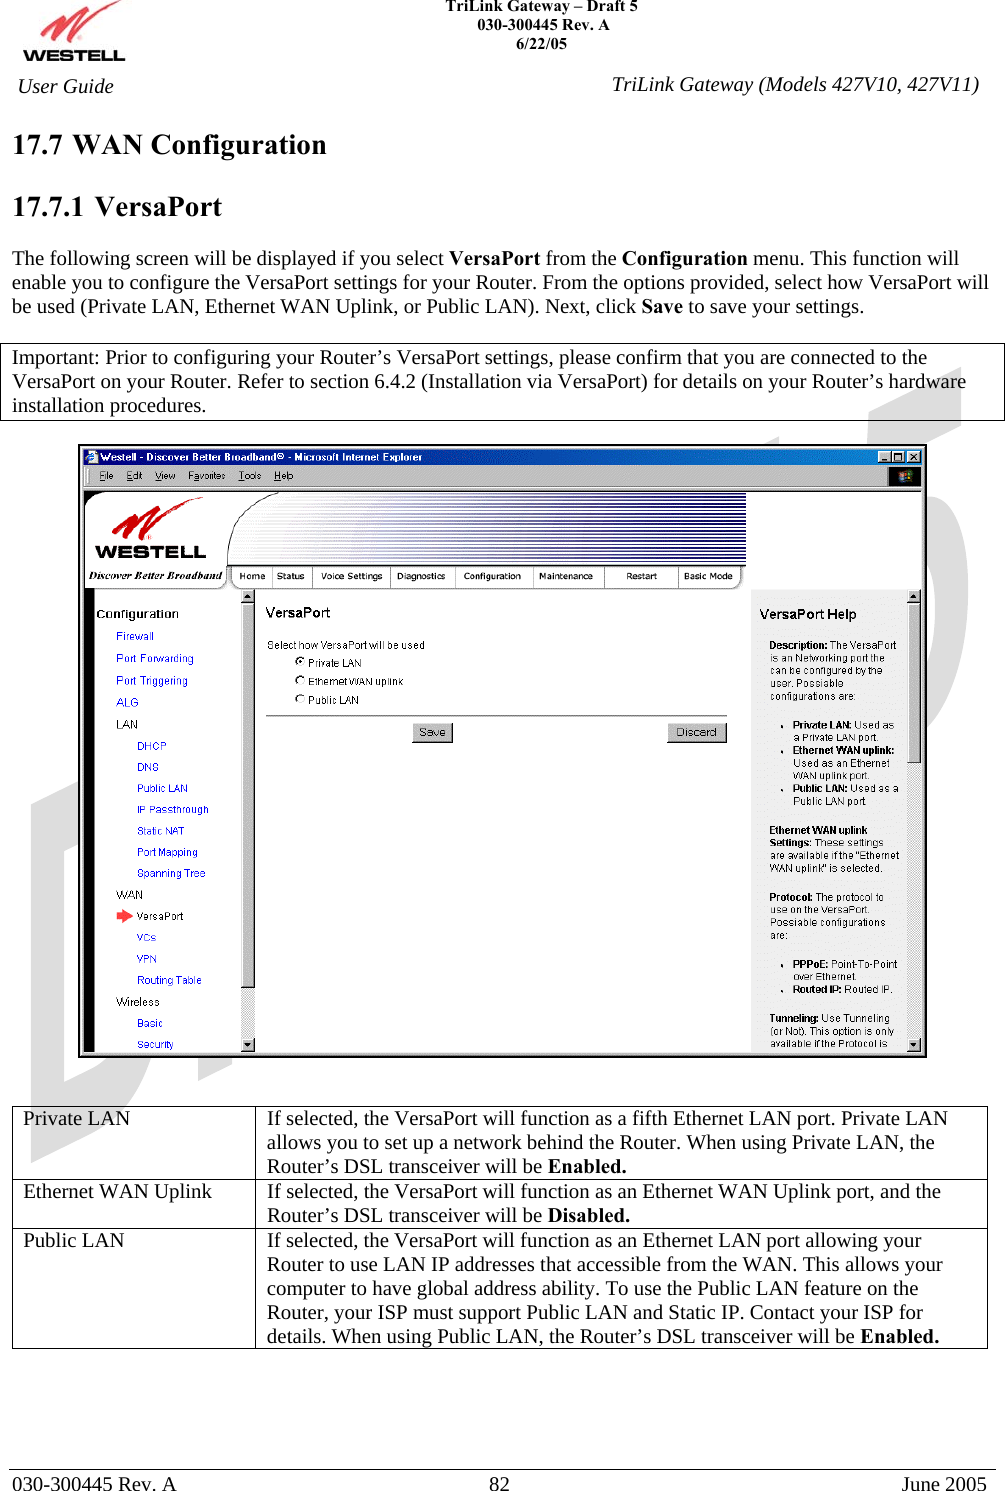    TriLink Gateway – Draft 5   030-300445 Rev. A 6/22/05   030-300445 Rev. A  82  June 2005  User Guide  TriLink Gateway (Models 427V10, 427V11)17.7 WAN Configuration  17.7.1   VersaPort  The following screen will be displayed if you select VersaPort from the Configuration menu. This function will enable you to configure the VersaPort settings for your Router. From the options provided, select how VersaPort will be used (Private LAN, Ethernet WAN Uplink, or Public LAN). Next, click Save to save your settings.  Important: Prior to configuring your Router’s VersaPort settings, please confirm that you are connected to the VersaPort on your Router. Refer to section 6.4.2 (Installation via VersaPort) for details on your Router’s hardware installation procedures.     Private LAN  If selected, the VersaPort will function as a fifth Ethernet LAN port. Private LAN allows you to set up a network behind the Router. When using Private LAN, the Router’s DSL transceiver will be Enabled. Ethernet WAN Uplink  If selected, the VersaPort will function as an Ethernet WAN Uplink port, and the Router’s DSL transceiver will be Disabled. Public LAN  If selected, the VersaPort will function as an Ethernet LAN port allowing your Router to use LAN IP addresses that accessible from the WAN. This allows your computer to have global address ability. To use the Public LAN feature on the Router, your ISP must support Public LAN and Static IP. Contact your ISP for details. When using Public LAN, the Router’s DSL transceiver will be Enabled.     